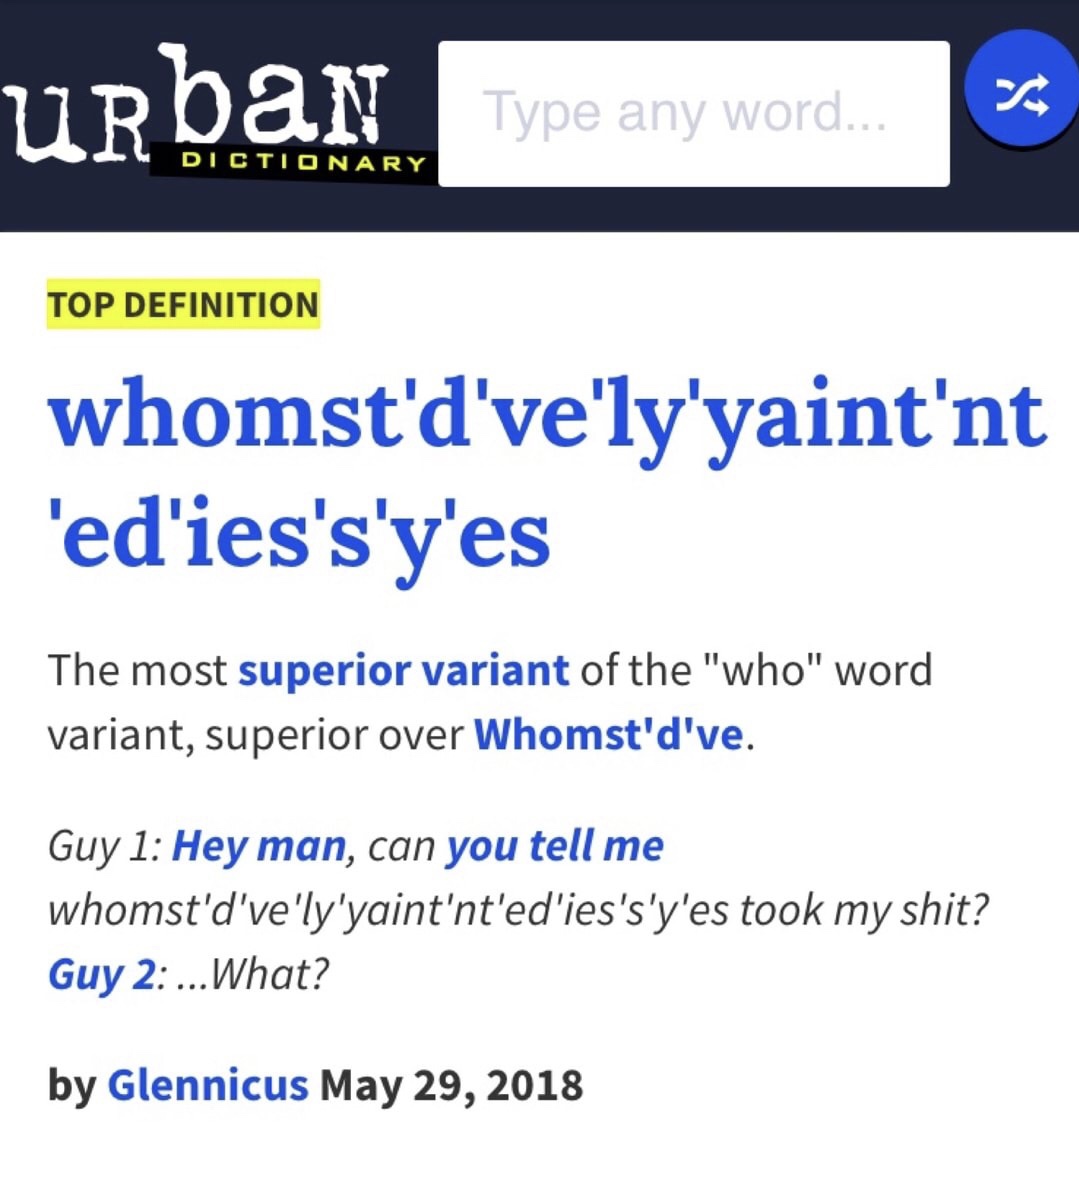 angle - Urban N Type any word... Dictionary Top Definition whomst'd've'ly'yaint'nt 'ed'ies's'y'es The most superior variant of the "who" word variant, superior over Whomst'd've. Guy 1 Hey man, can you tell me whomst'd've'ly'yaint'nt'ed'ies's'y'es took my 